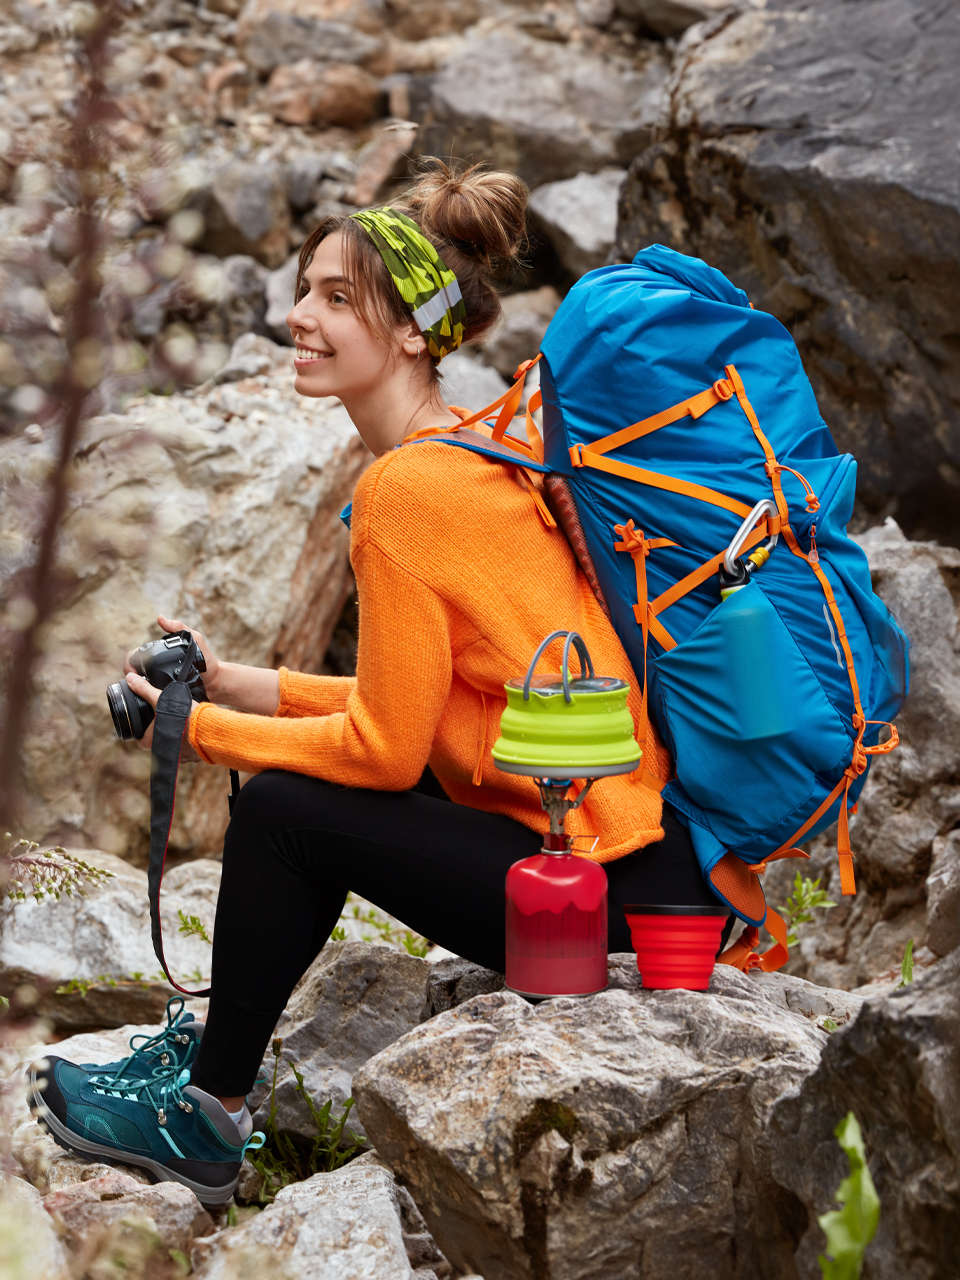 Best Hiking Clothes for Women: Stylish Outfit Ideas for Outdoor